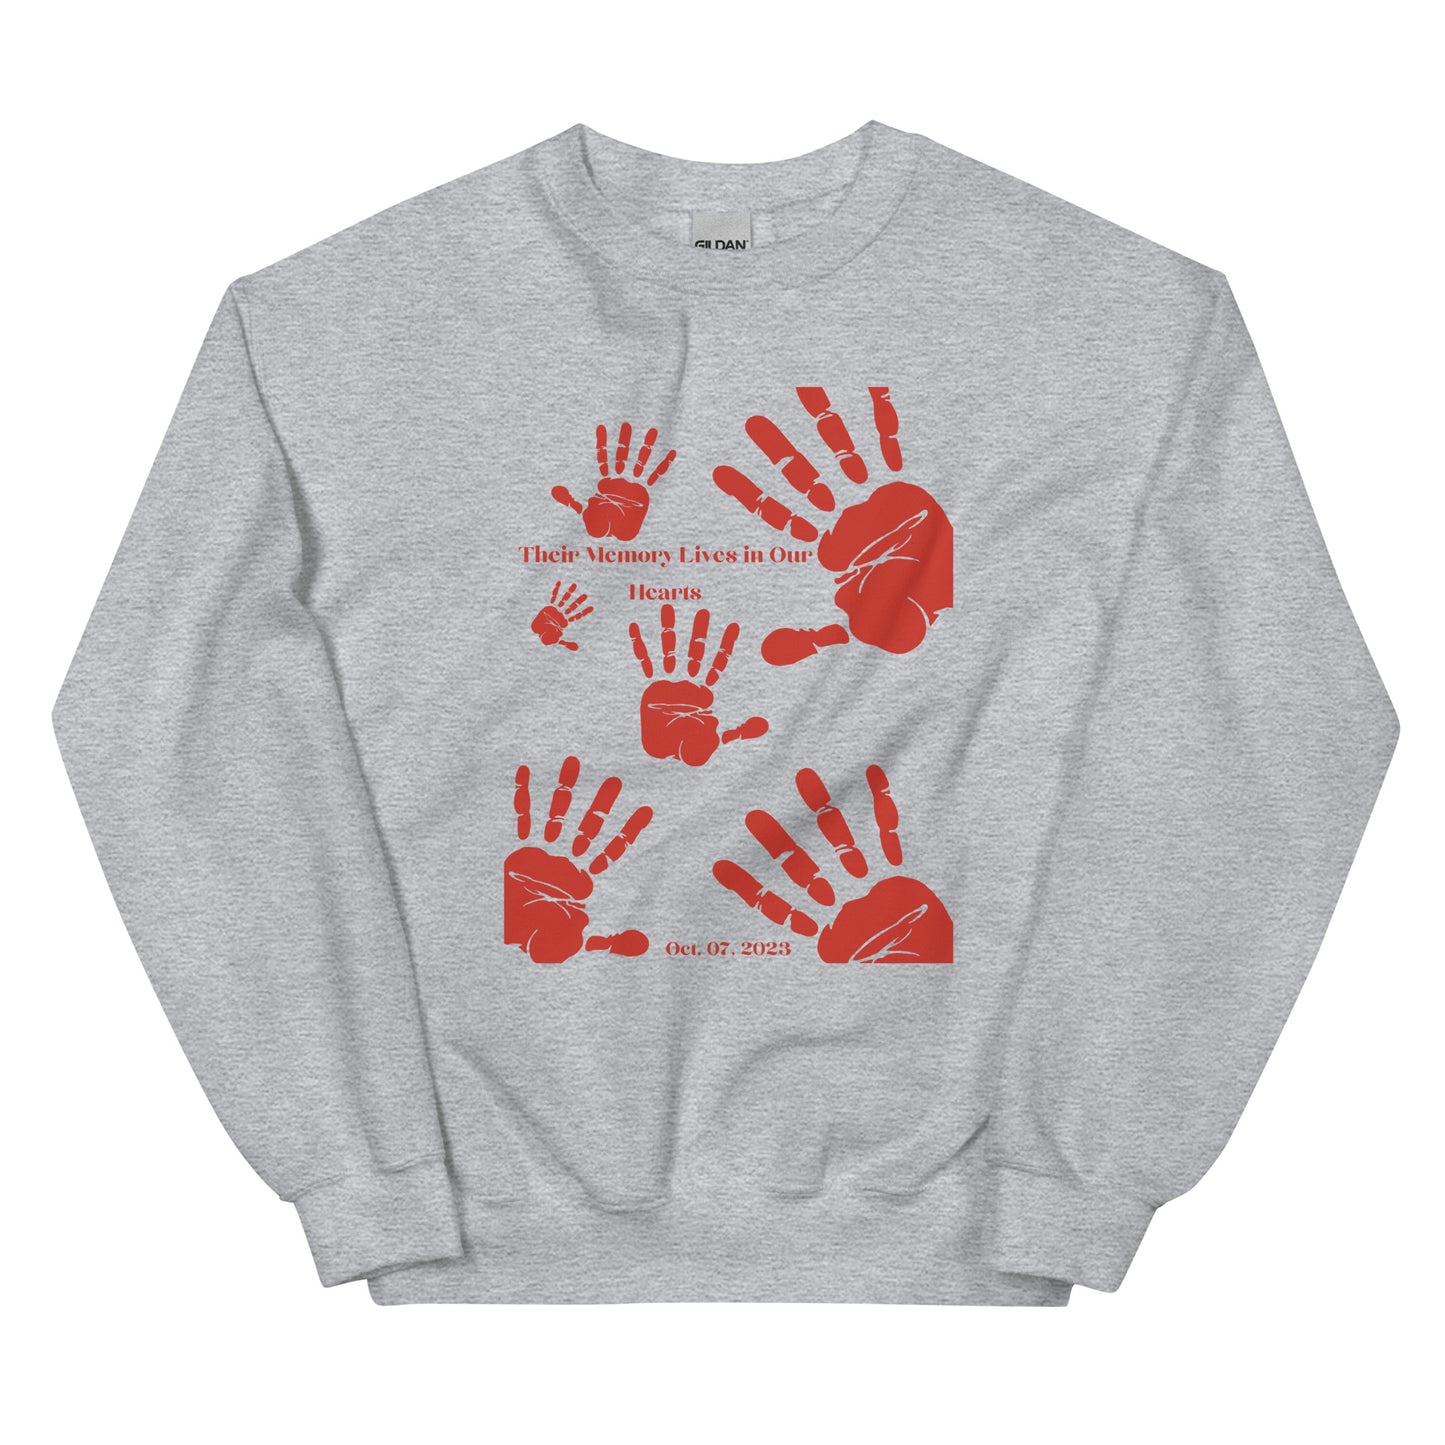 Their memory lives in our hearts - Unisex Sweatshirt (10 colors)